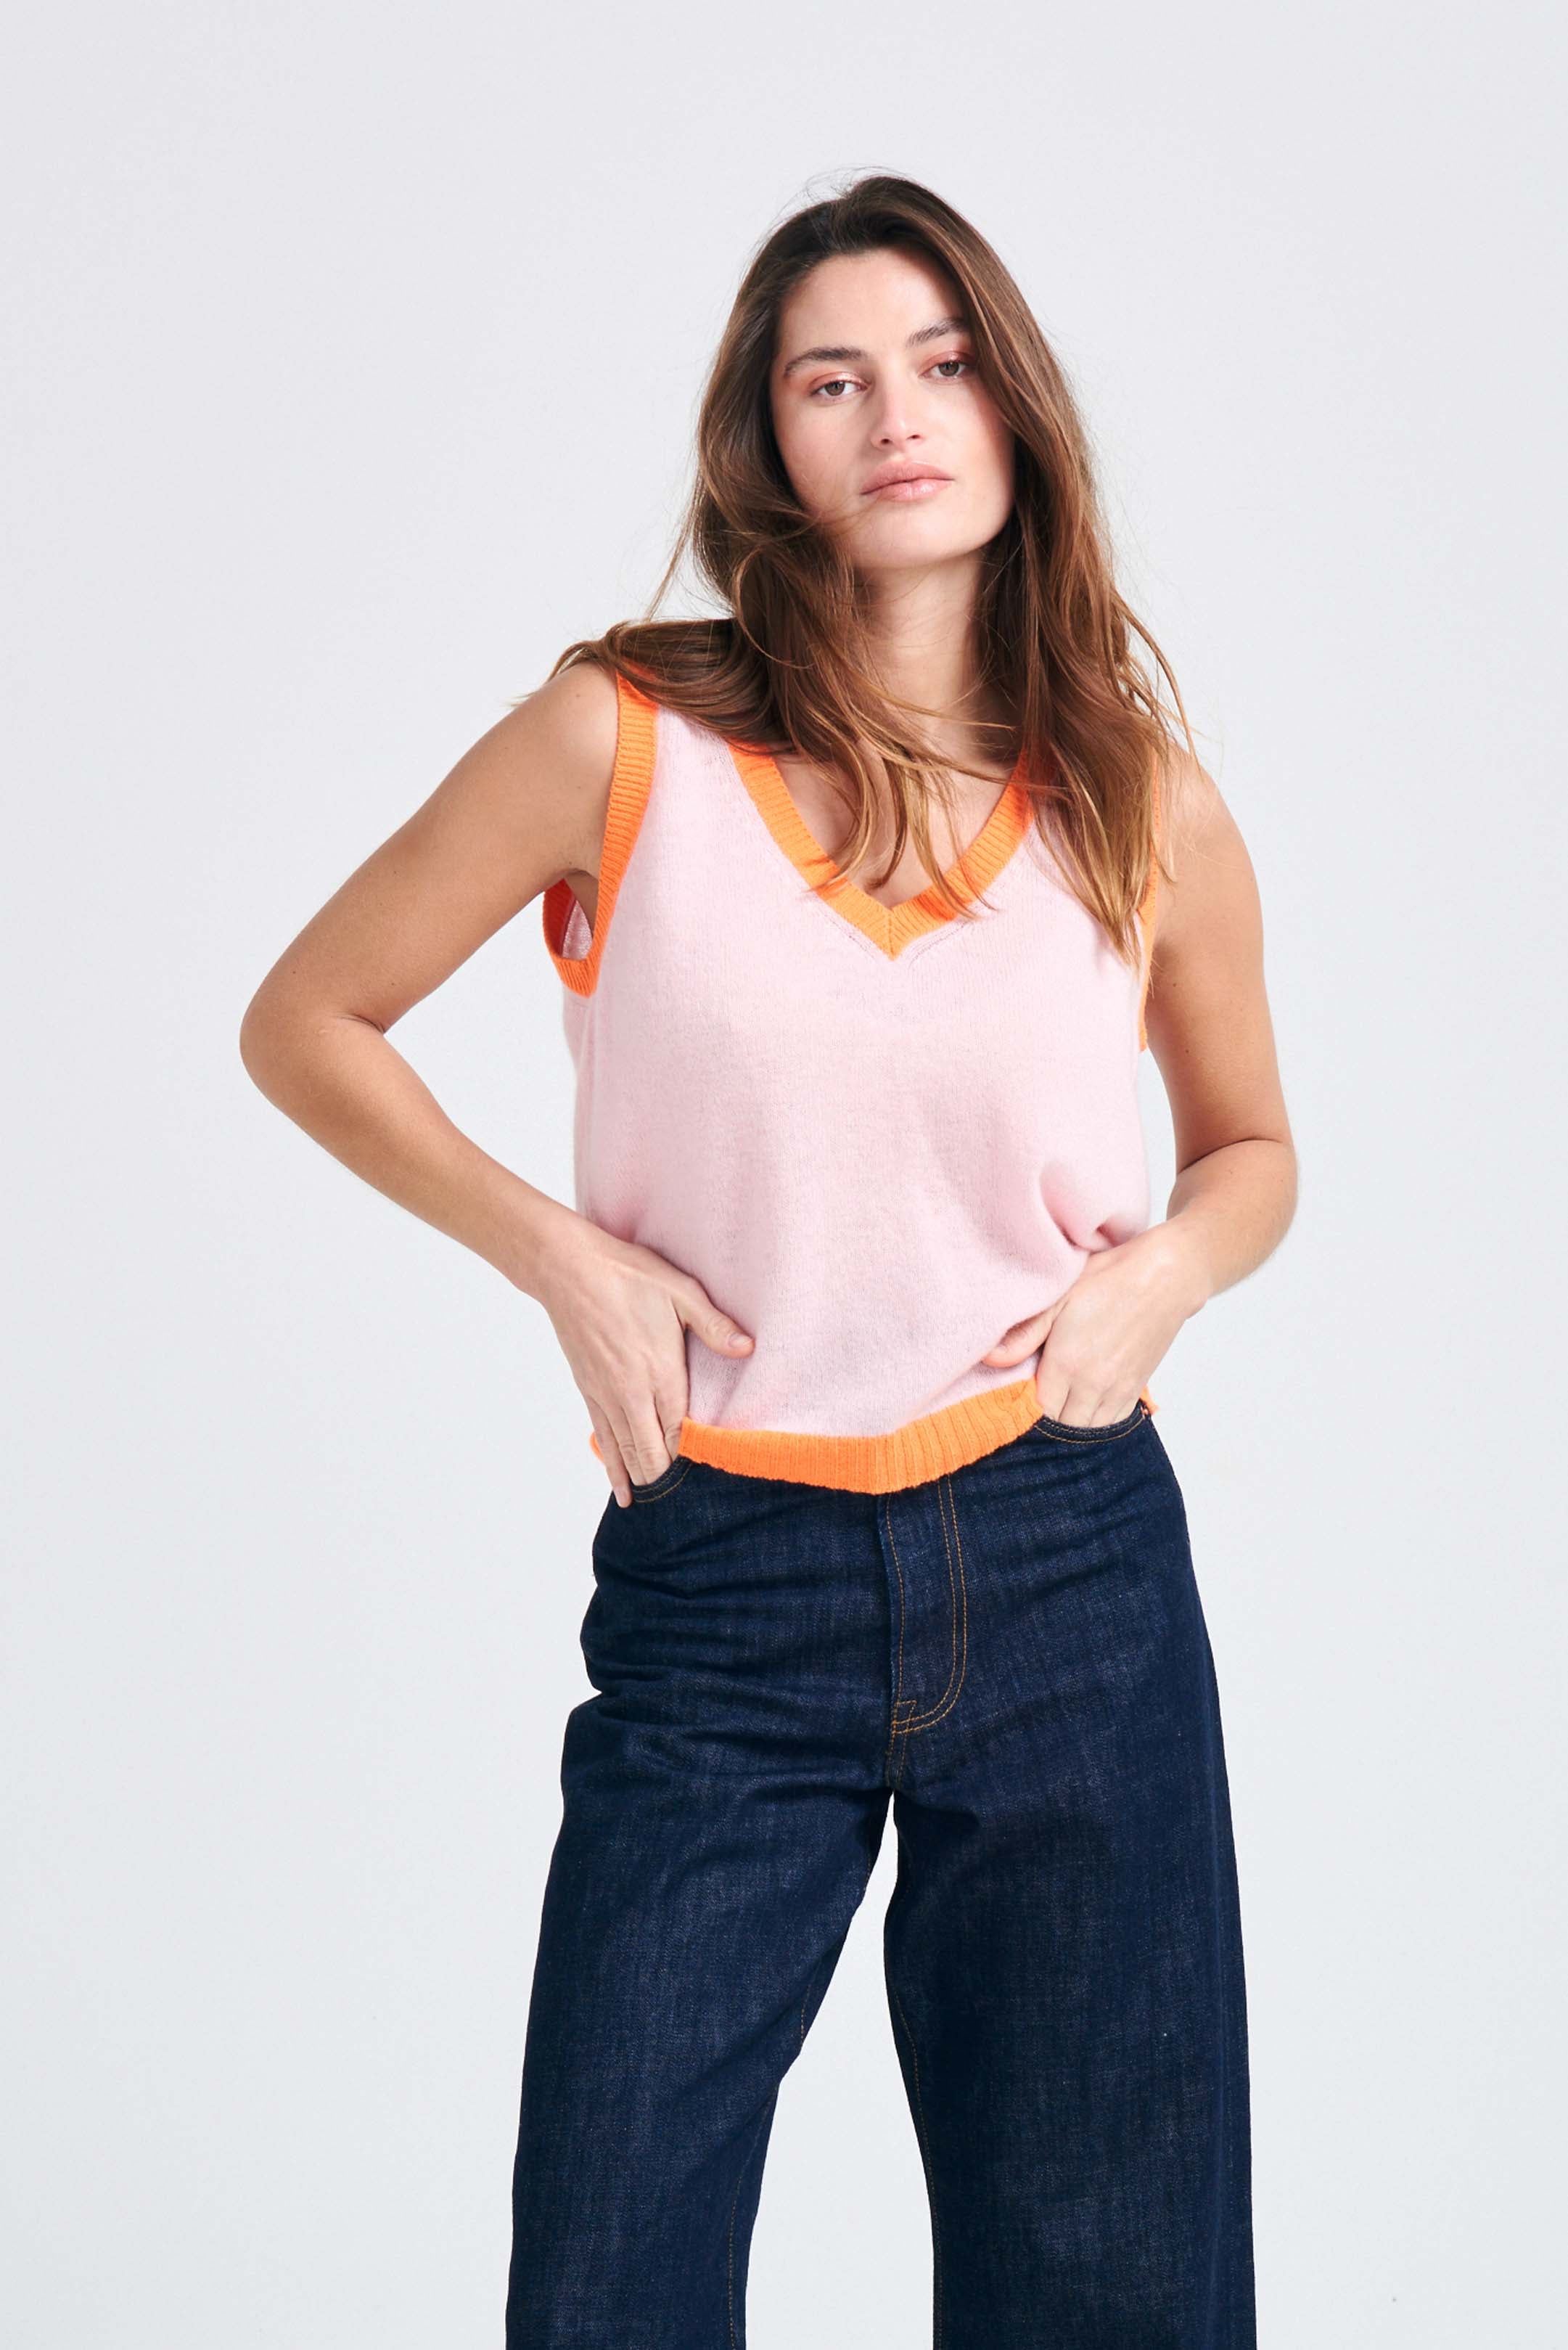 Brown haired female model wearing Jumper1234 Pale pink cashmere vee neck tank with contrast neon orange ribs